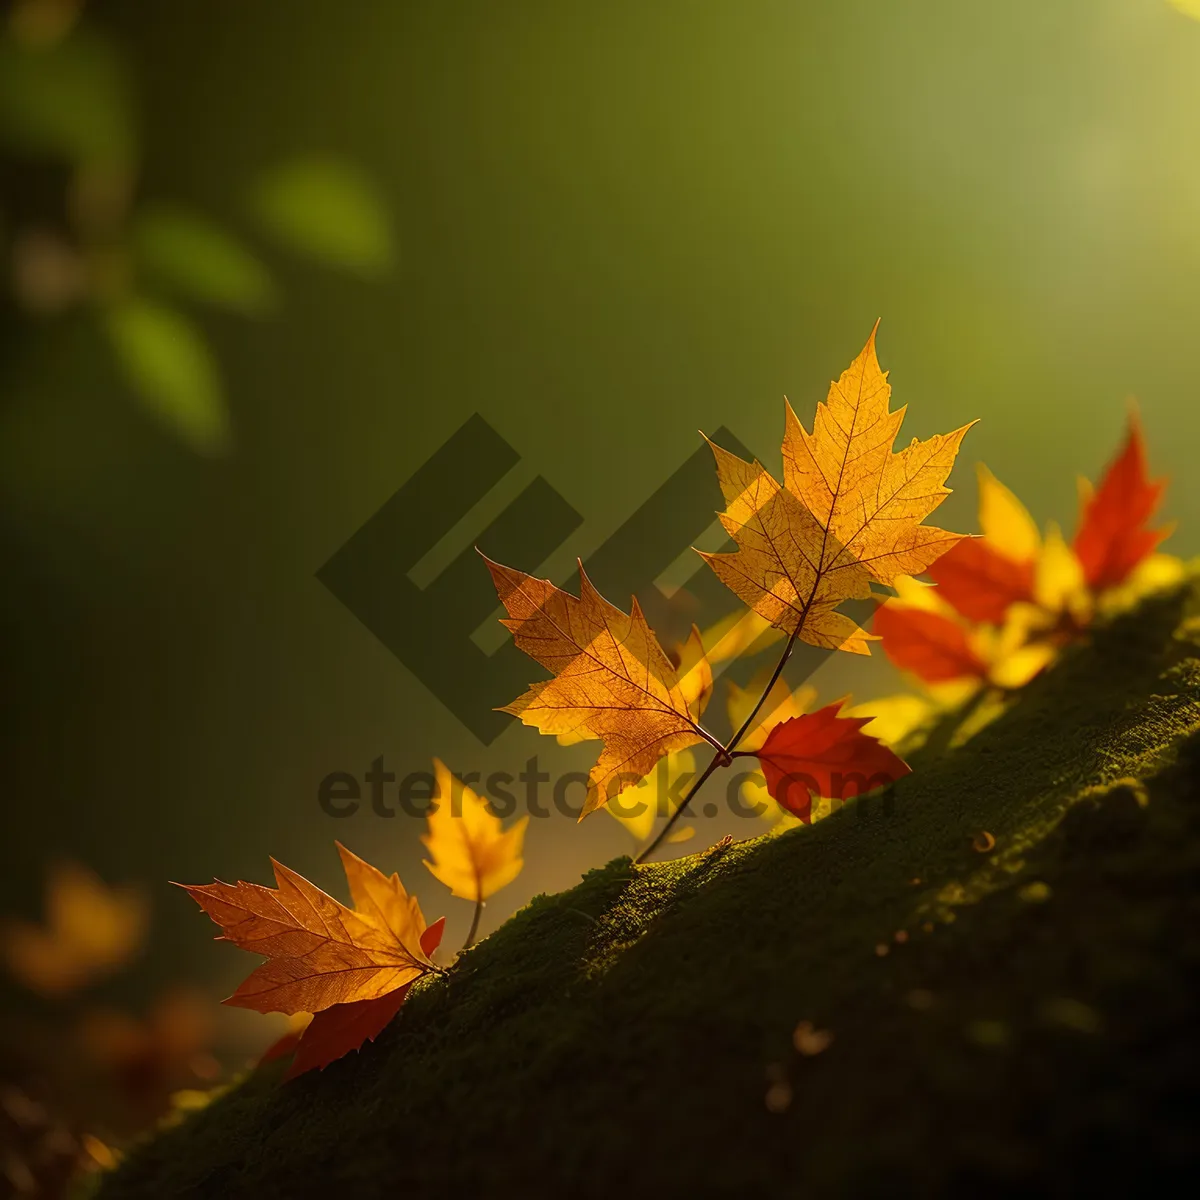 Picture of Autumn Maple Leaves in Vibrant Colors